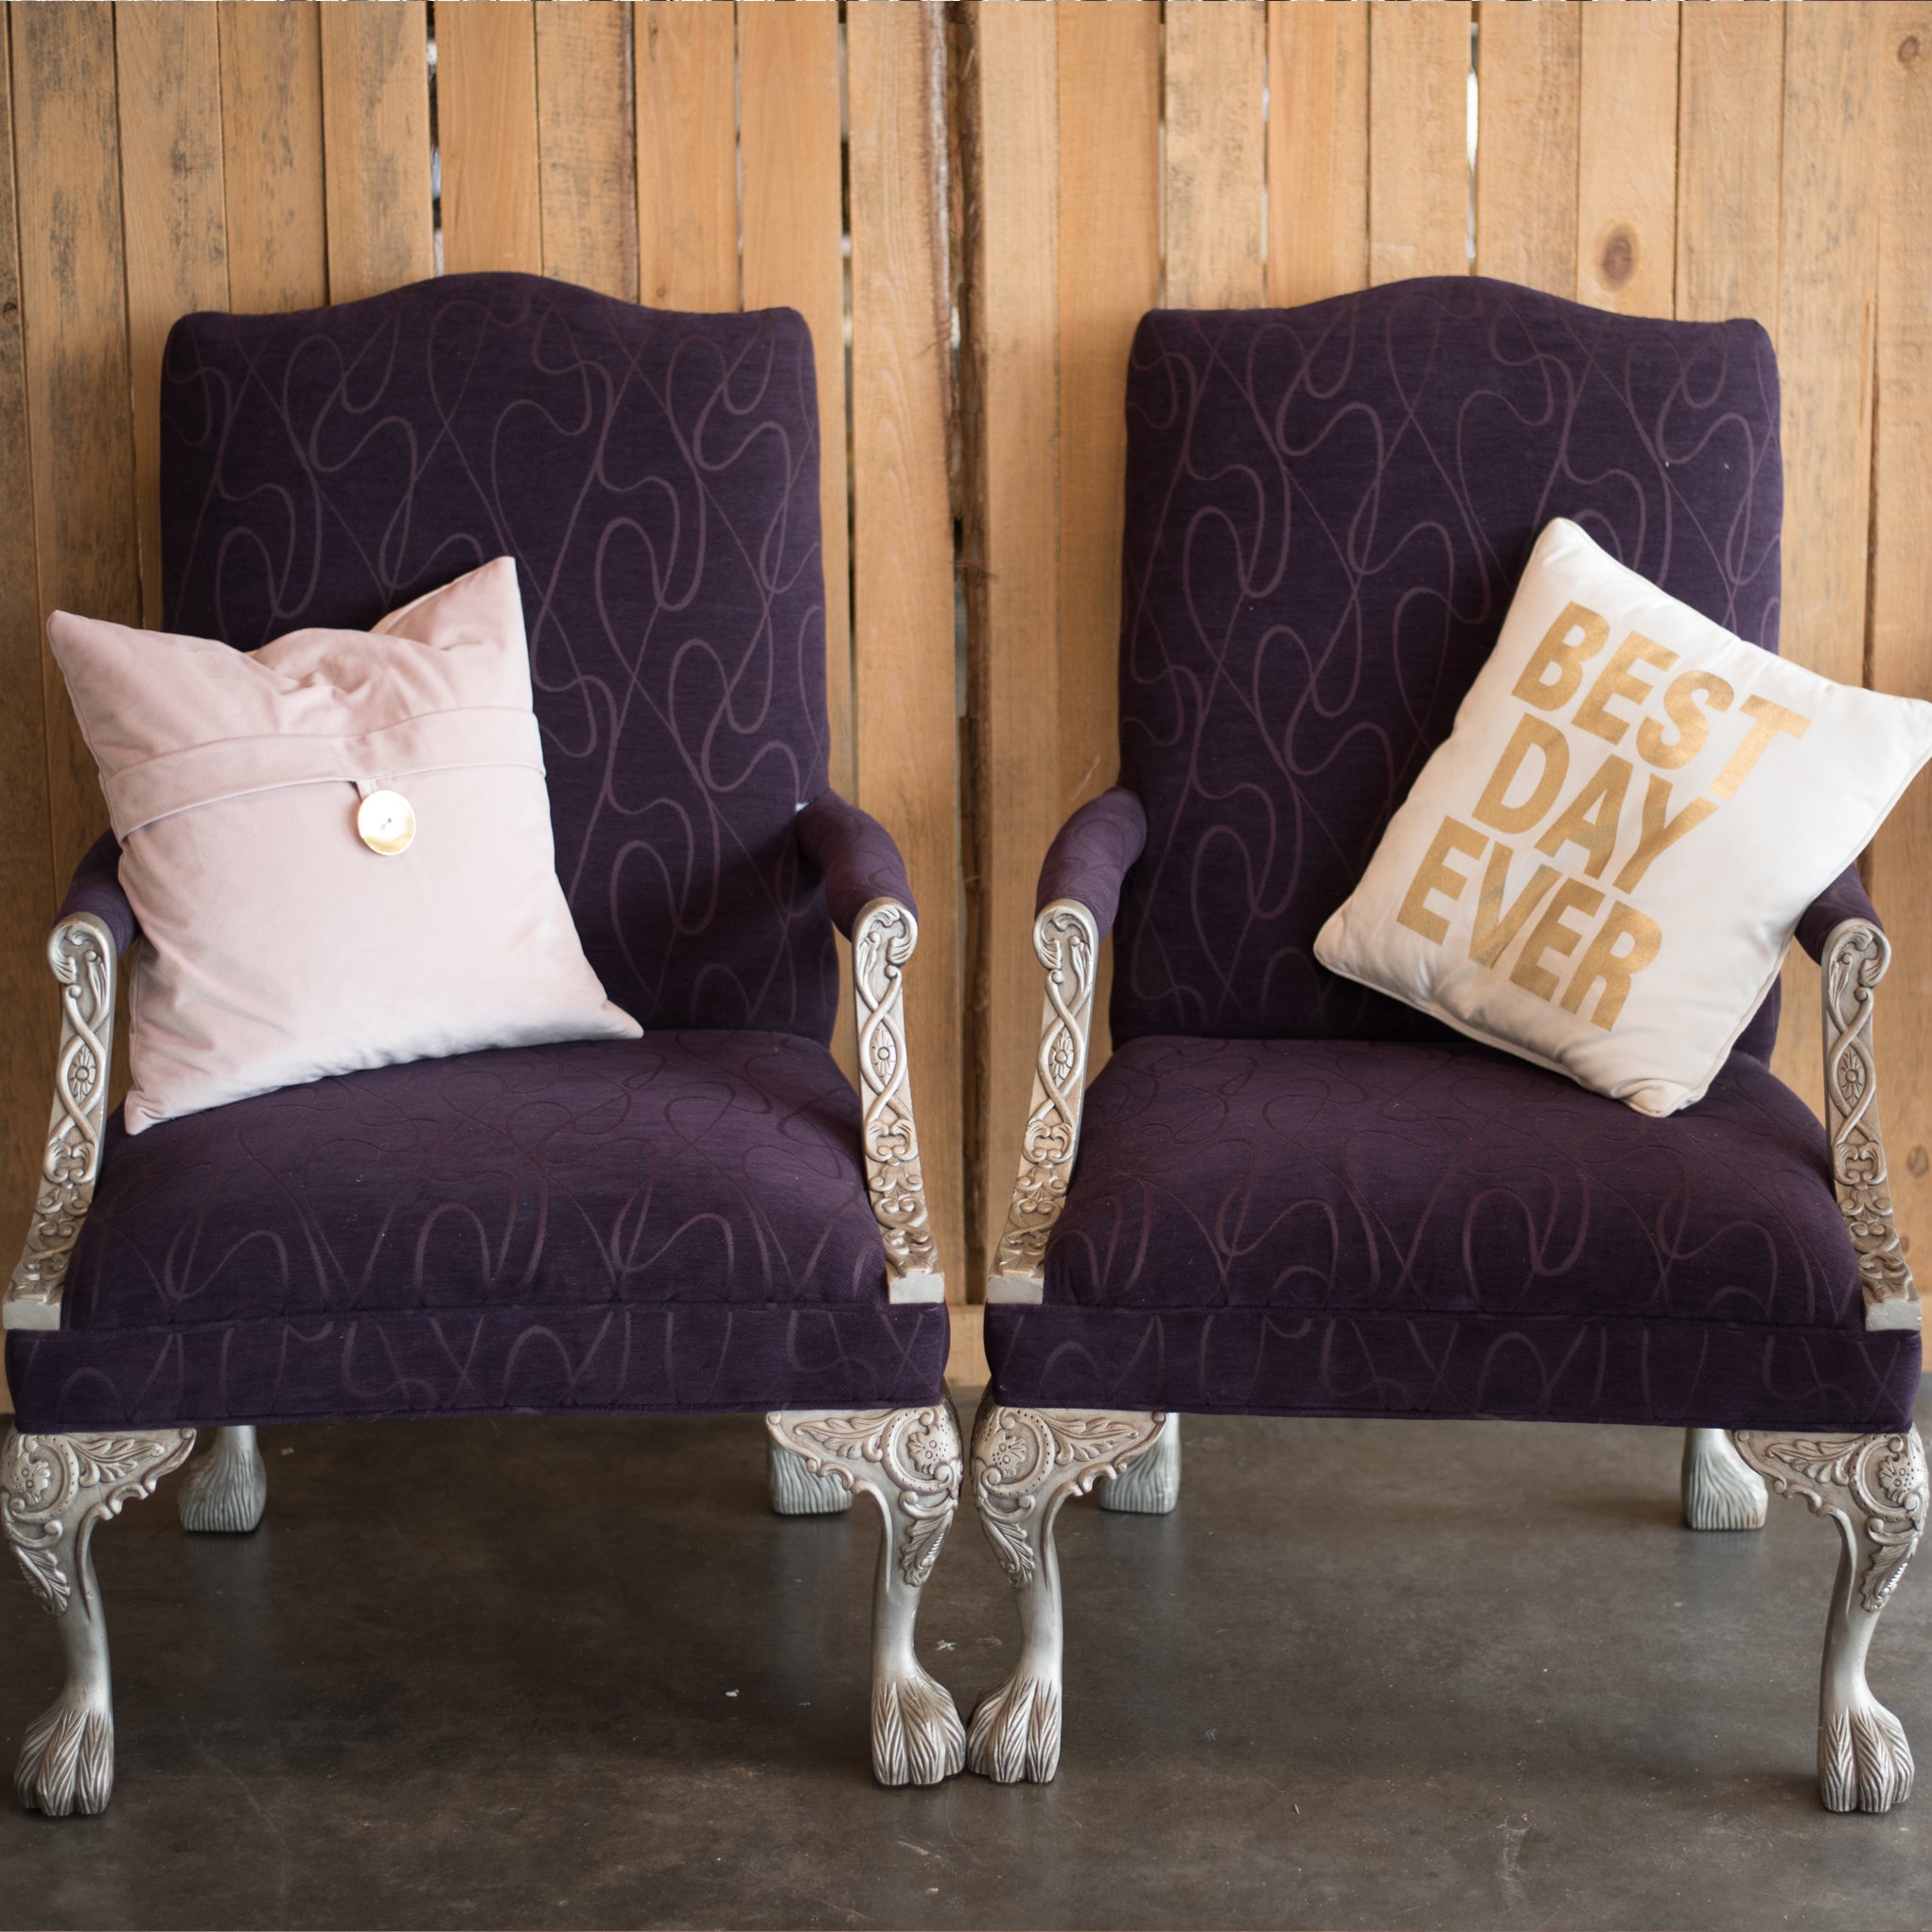 Royal King and Queen Sweetheart Chairs - The Wedding Shop